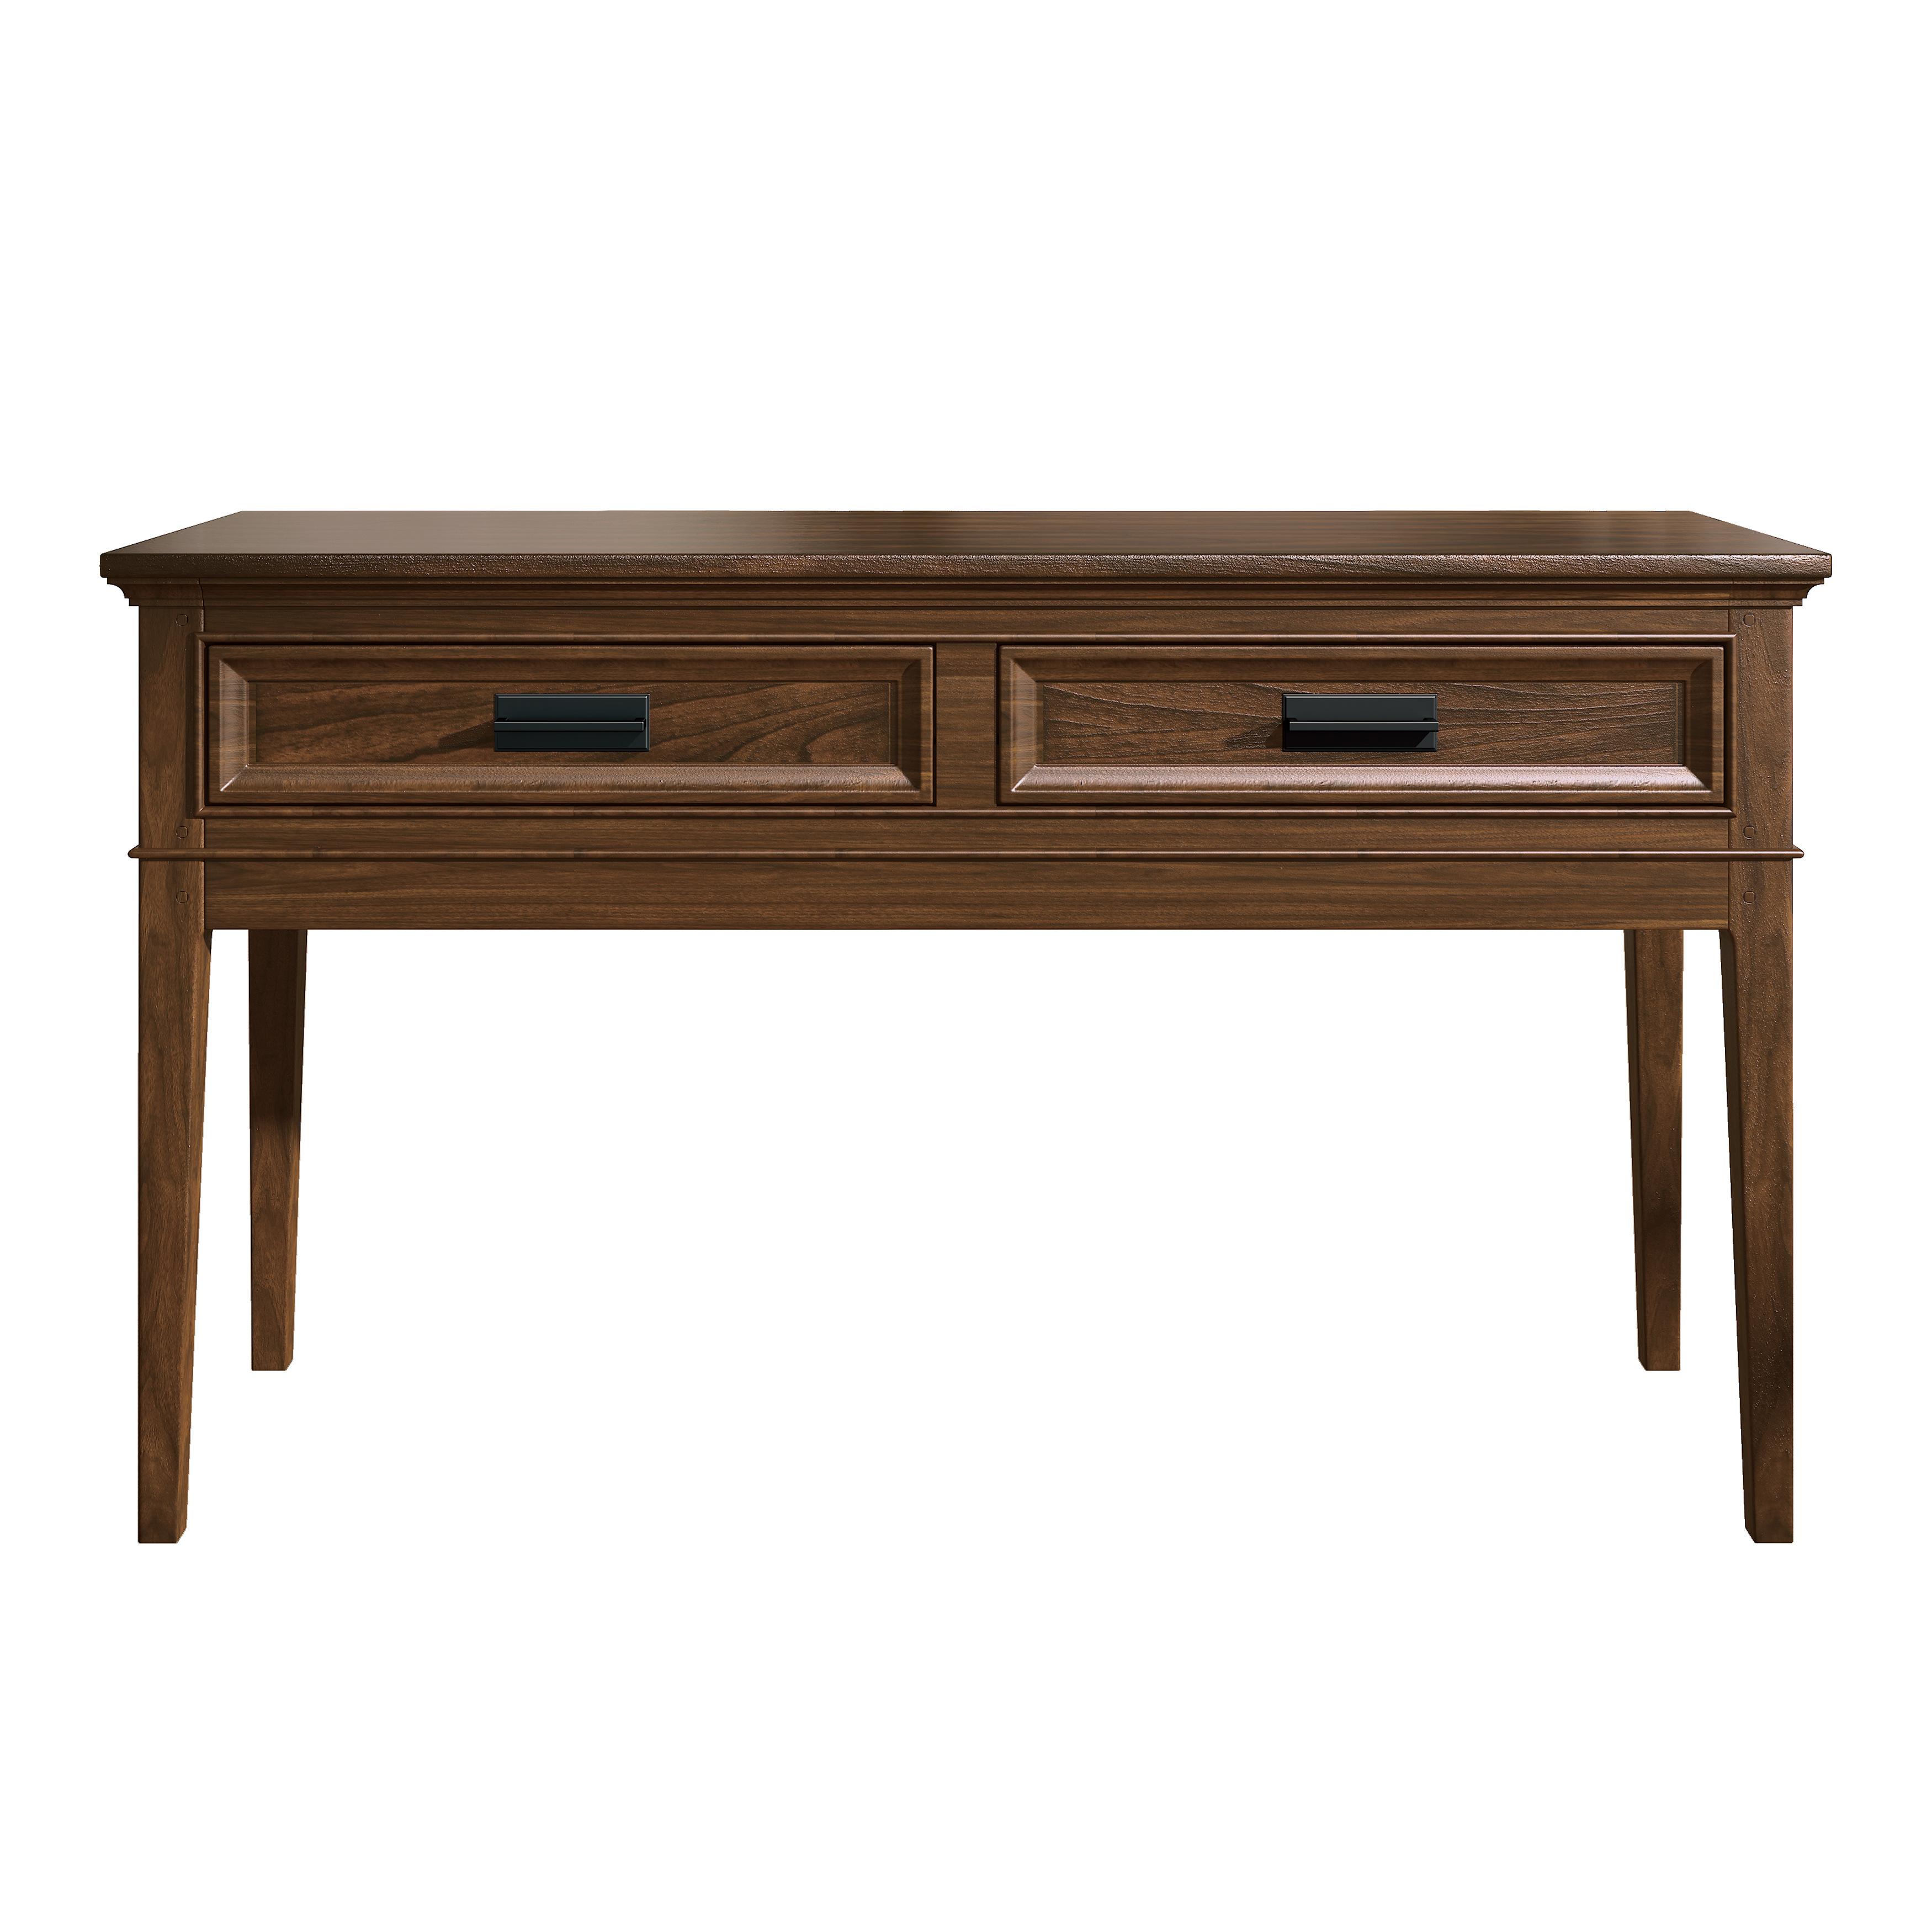 Traditional Sofa Table 1649-05 Frazier Park 1649-05 in Cherry 